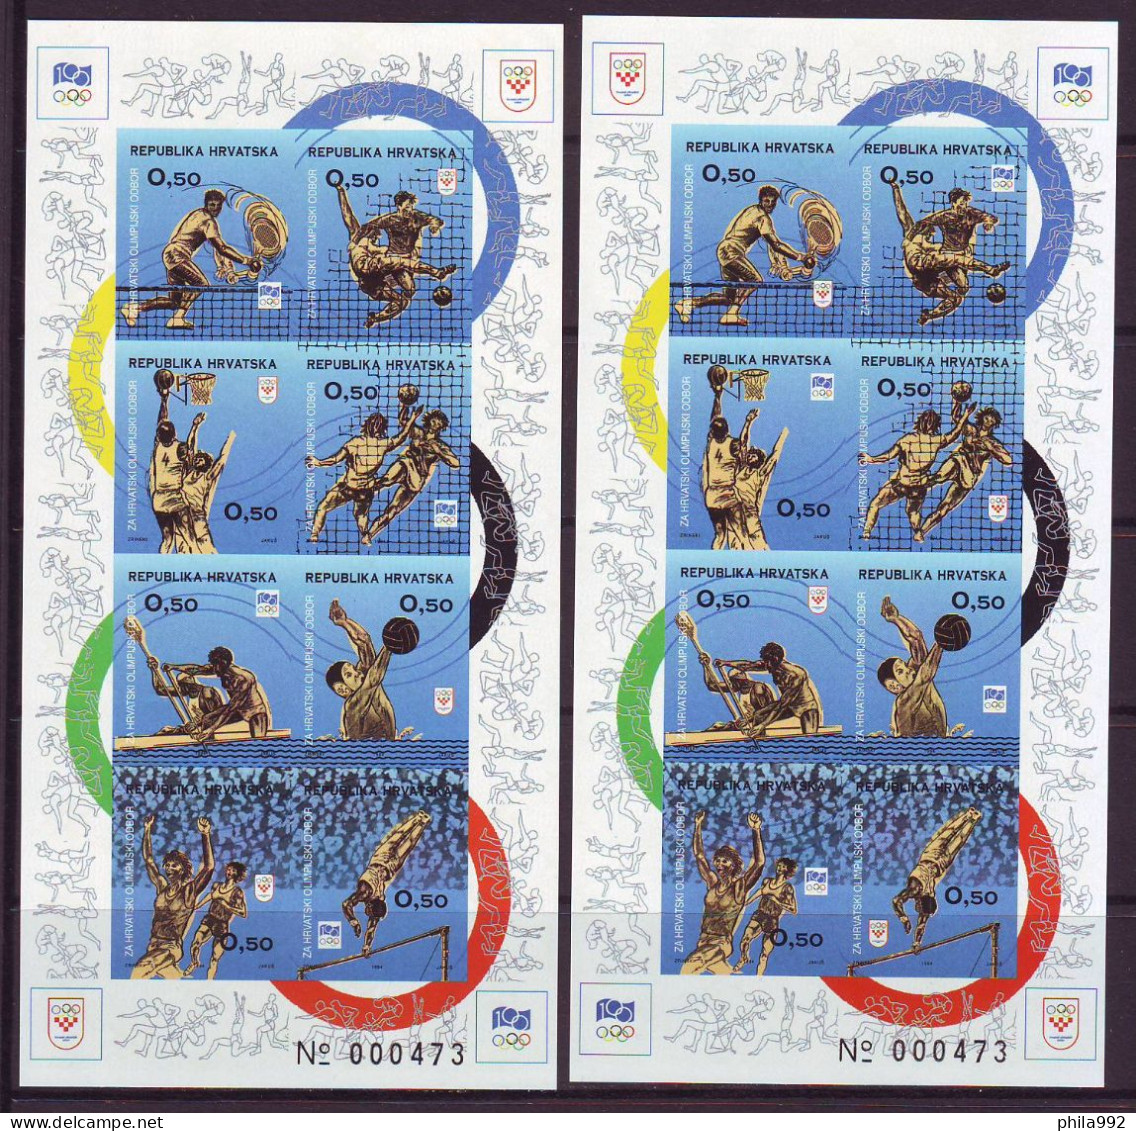 Croatia 1994 Charity Stamp SPORT Mi.No.42-49+50-57 2  Imperforated Mini Sheet Olympic Committee MNH - Kroatien